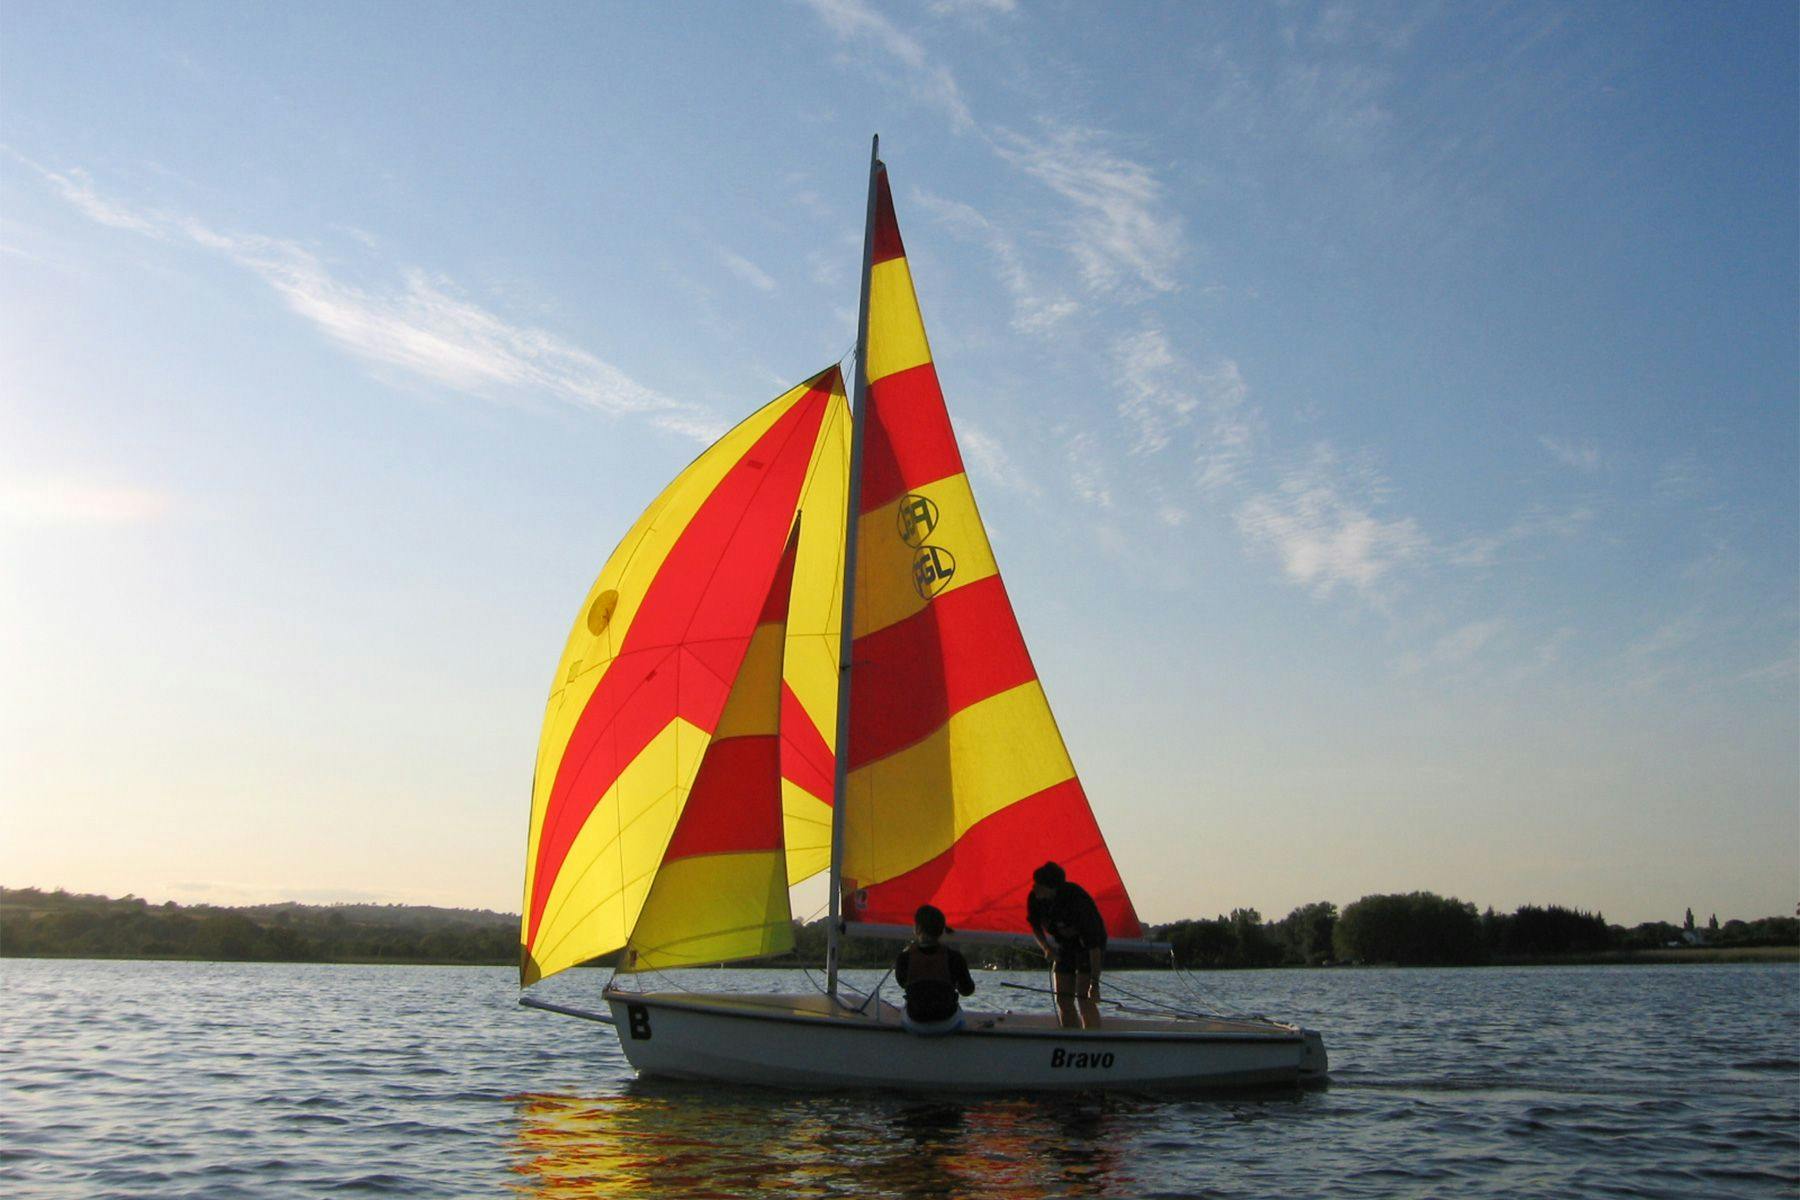 sailing a dinghy with backlit red and yellow sails and a spinnaker